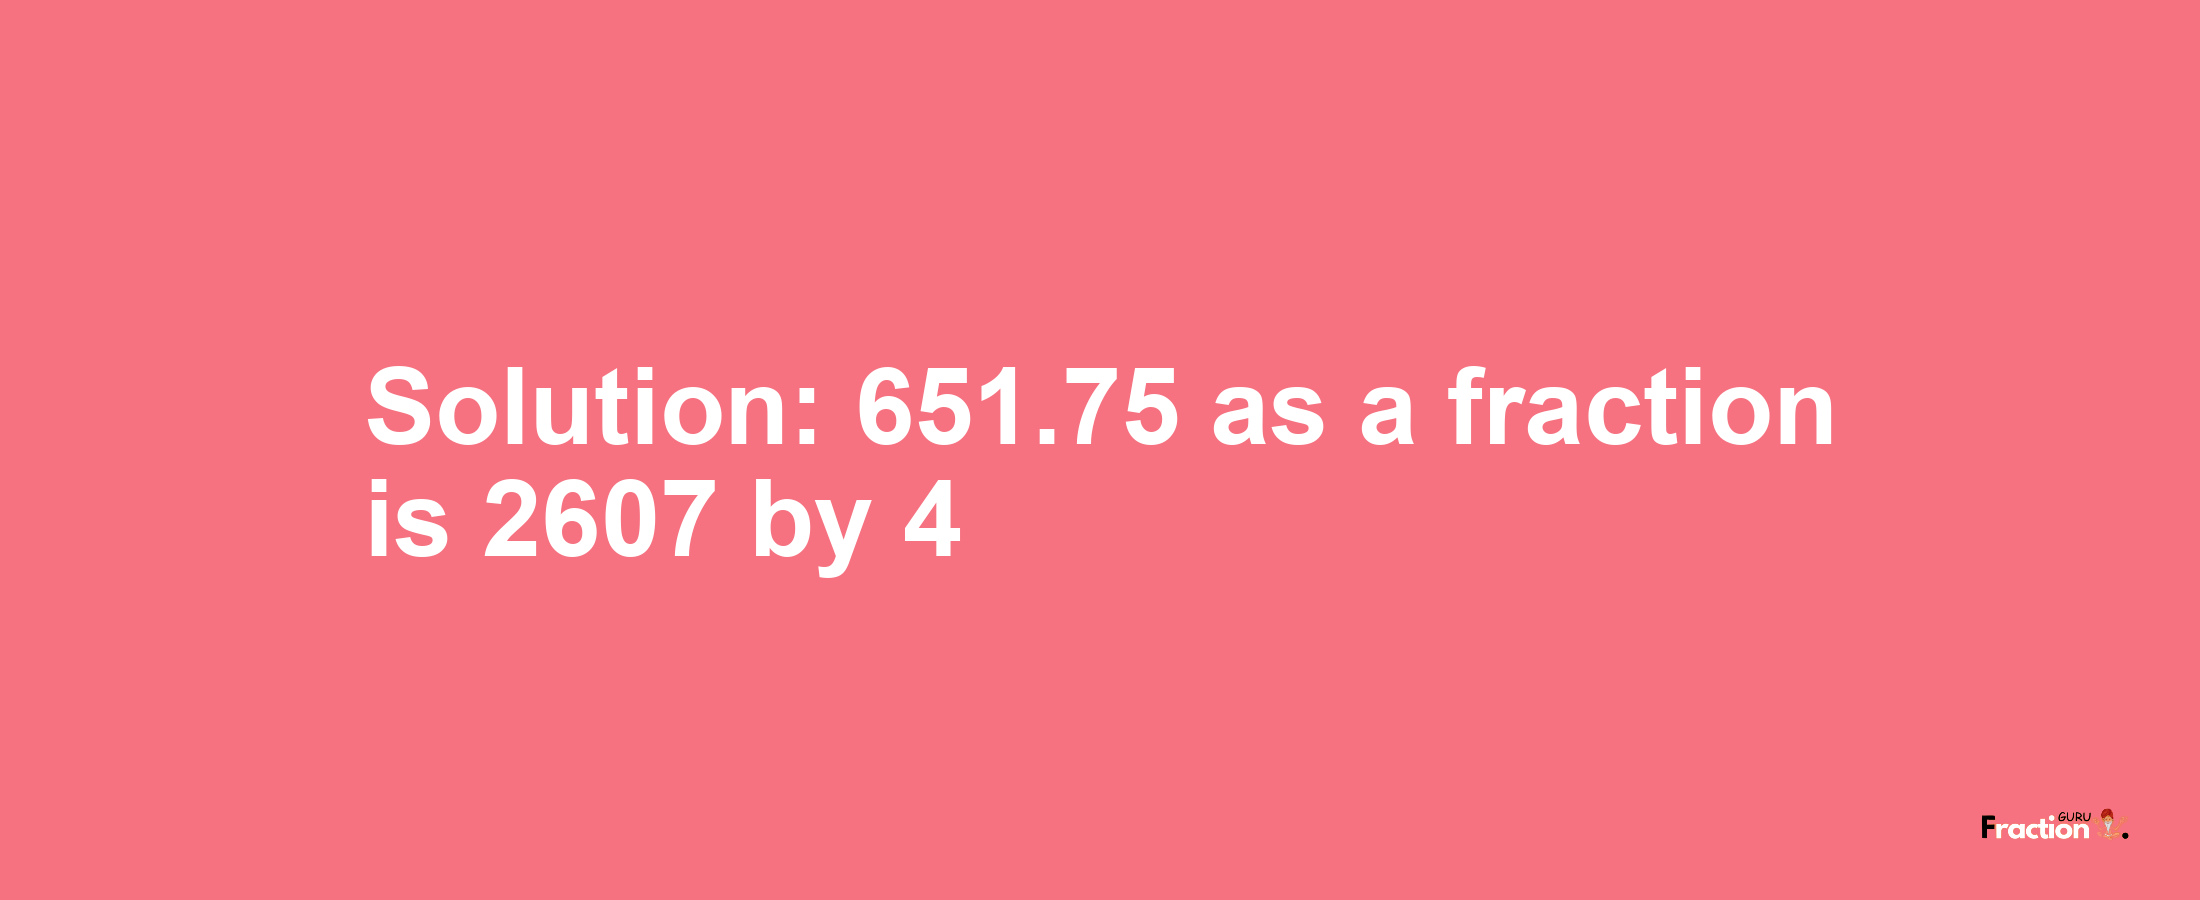 Solution:651.75 as a fraction is 2607/4